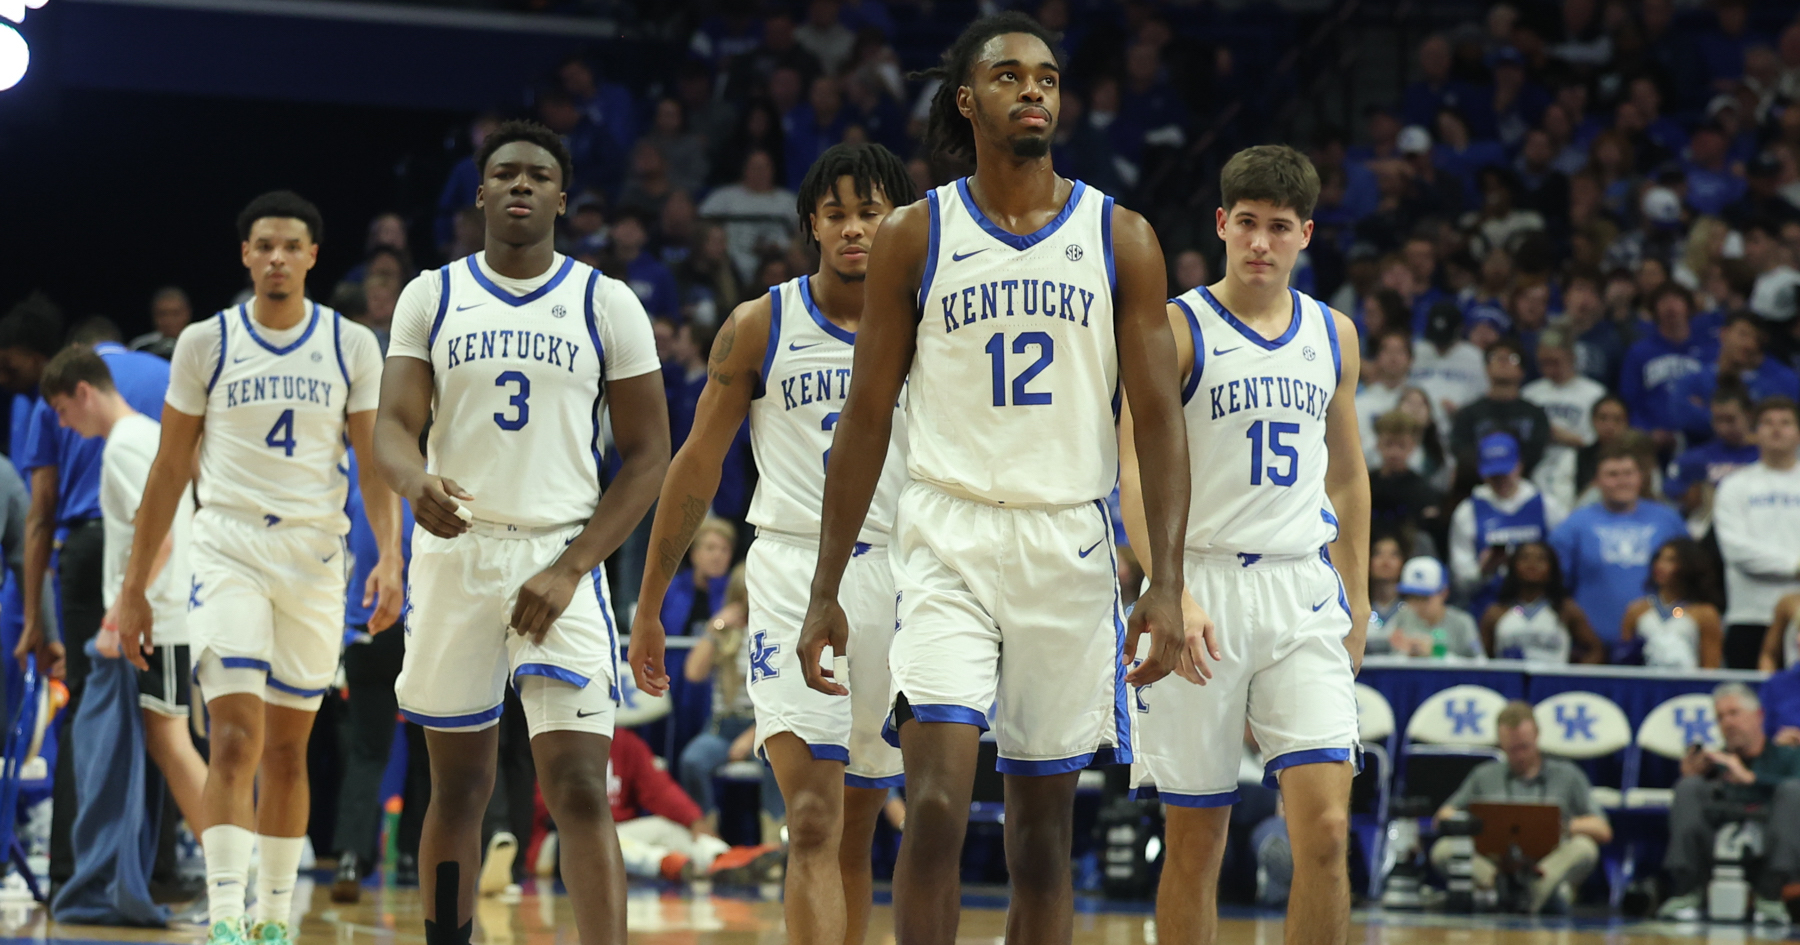 Kentucky passes one more early-season check with win over Saint Joseph’s